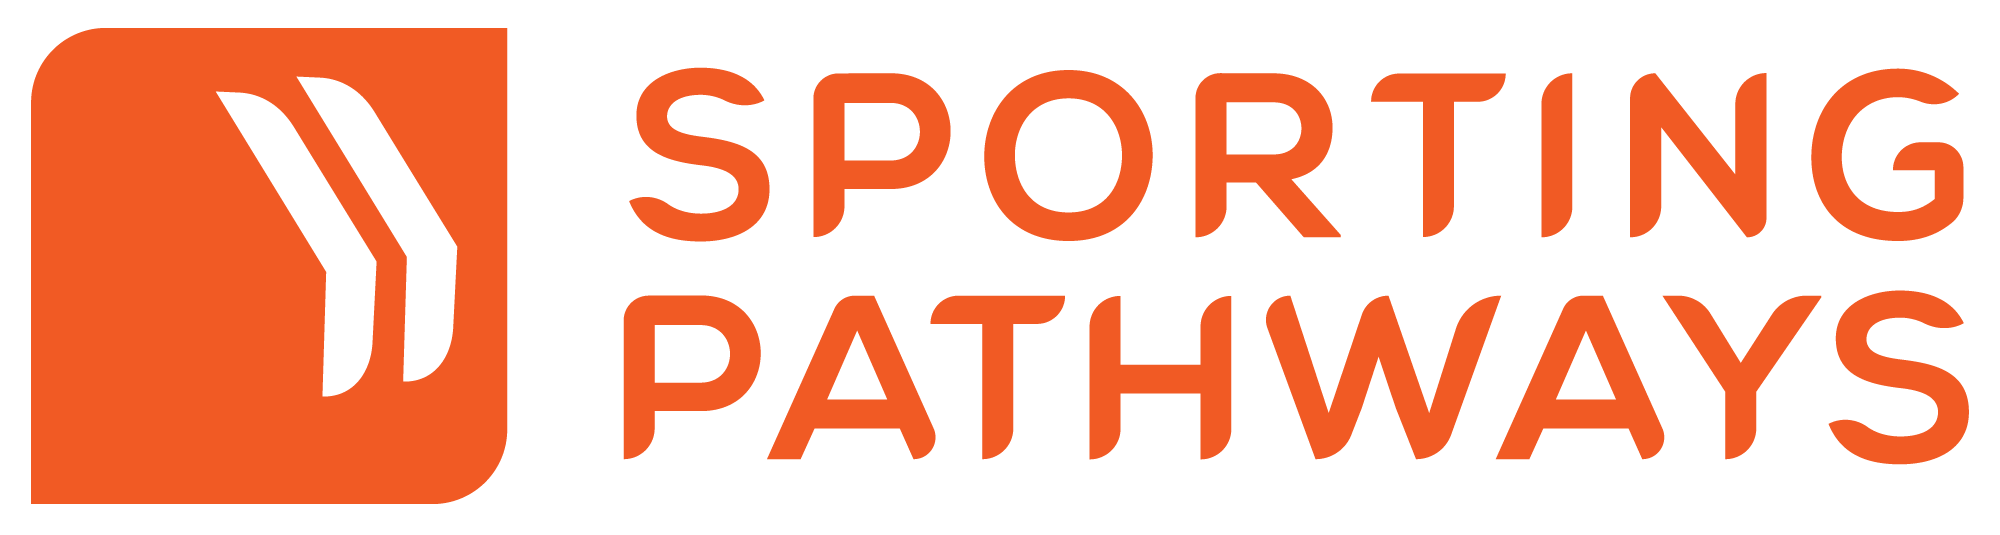 Sporting Pathways - Org Transparent - 2000px